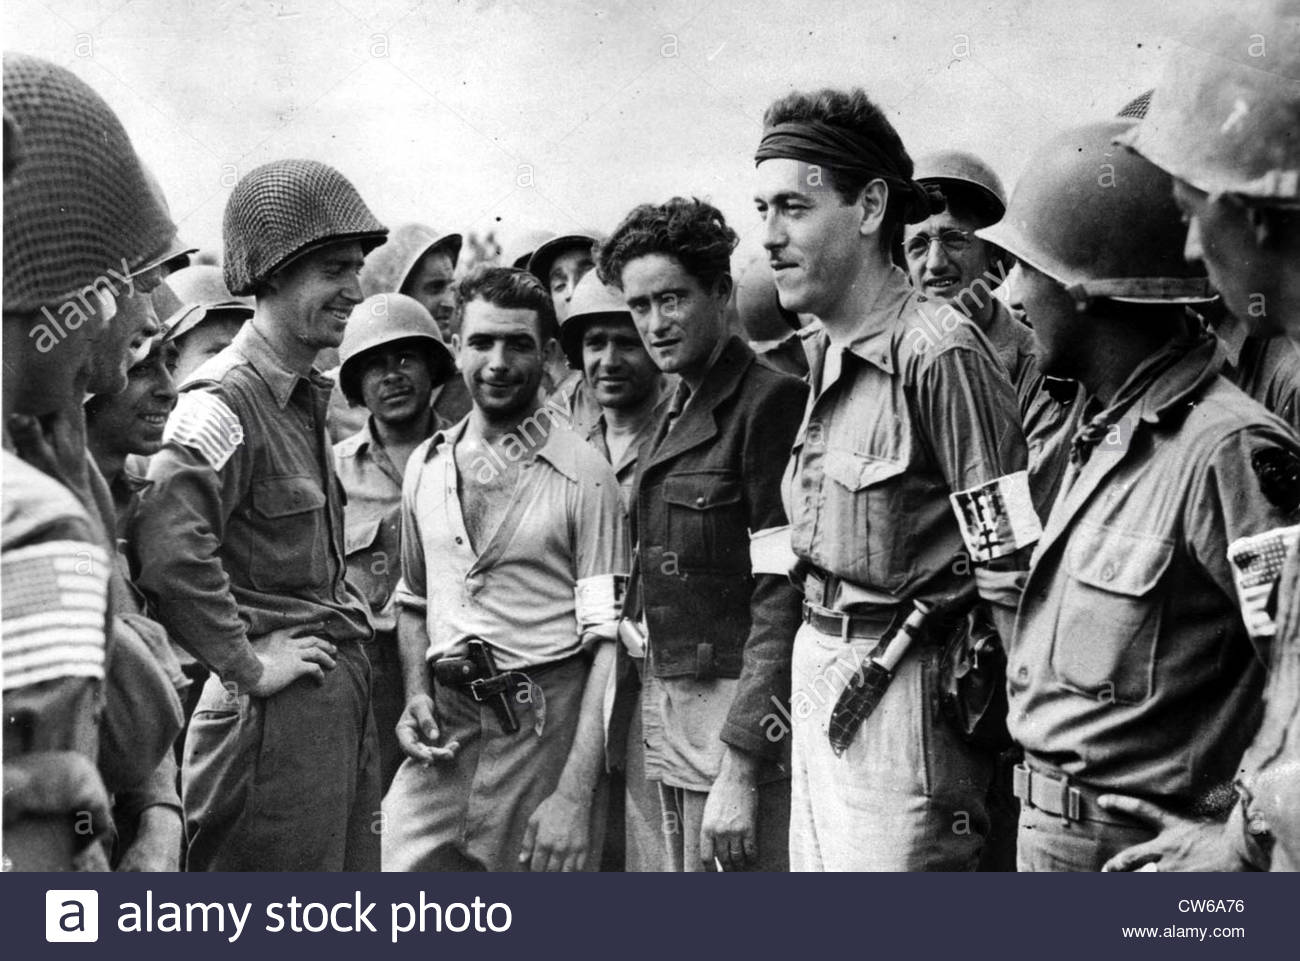 F.F.I. fraternise with U.S troops in Southern France (August 1944)